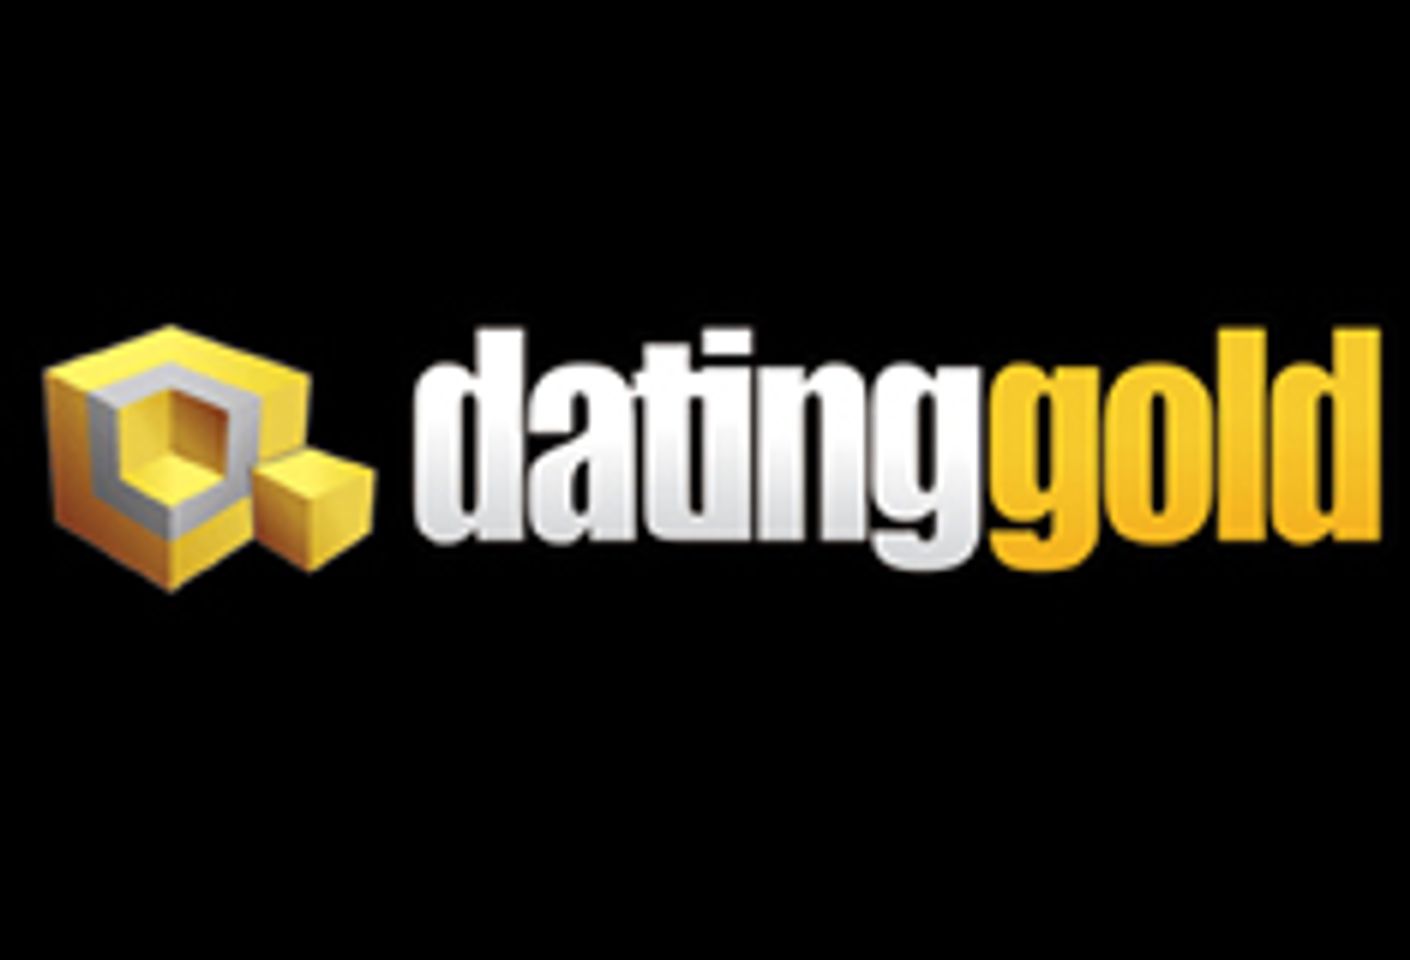 DatingGold Announces 'Summer Fever' Payout Promotion